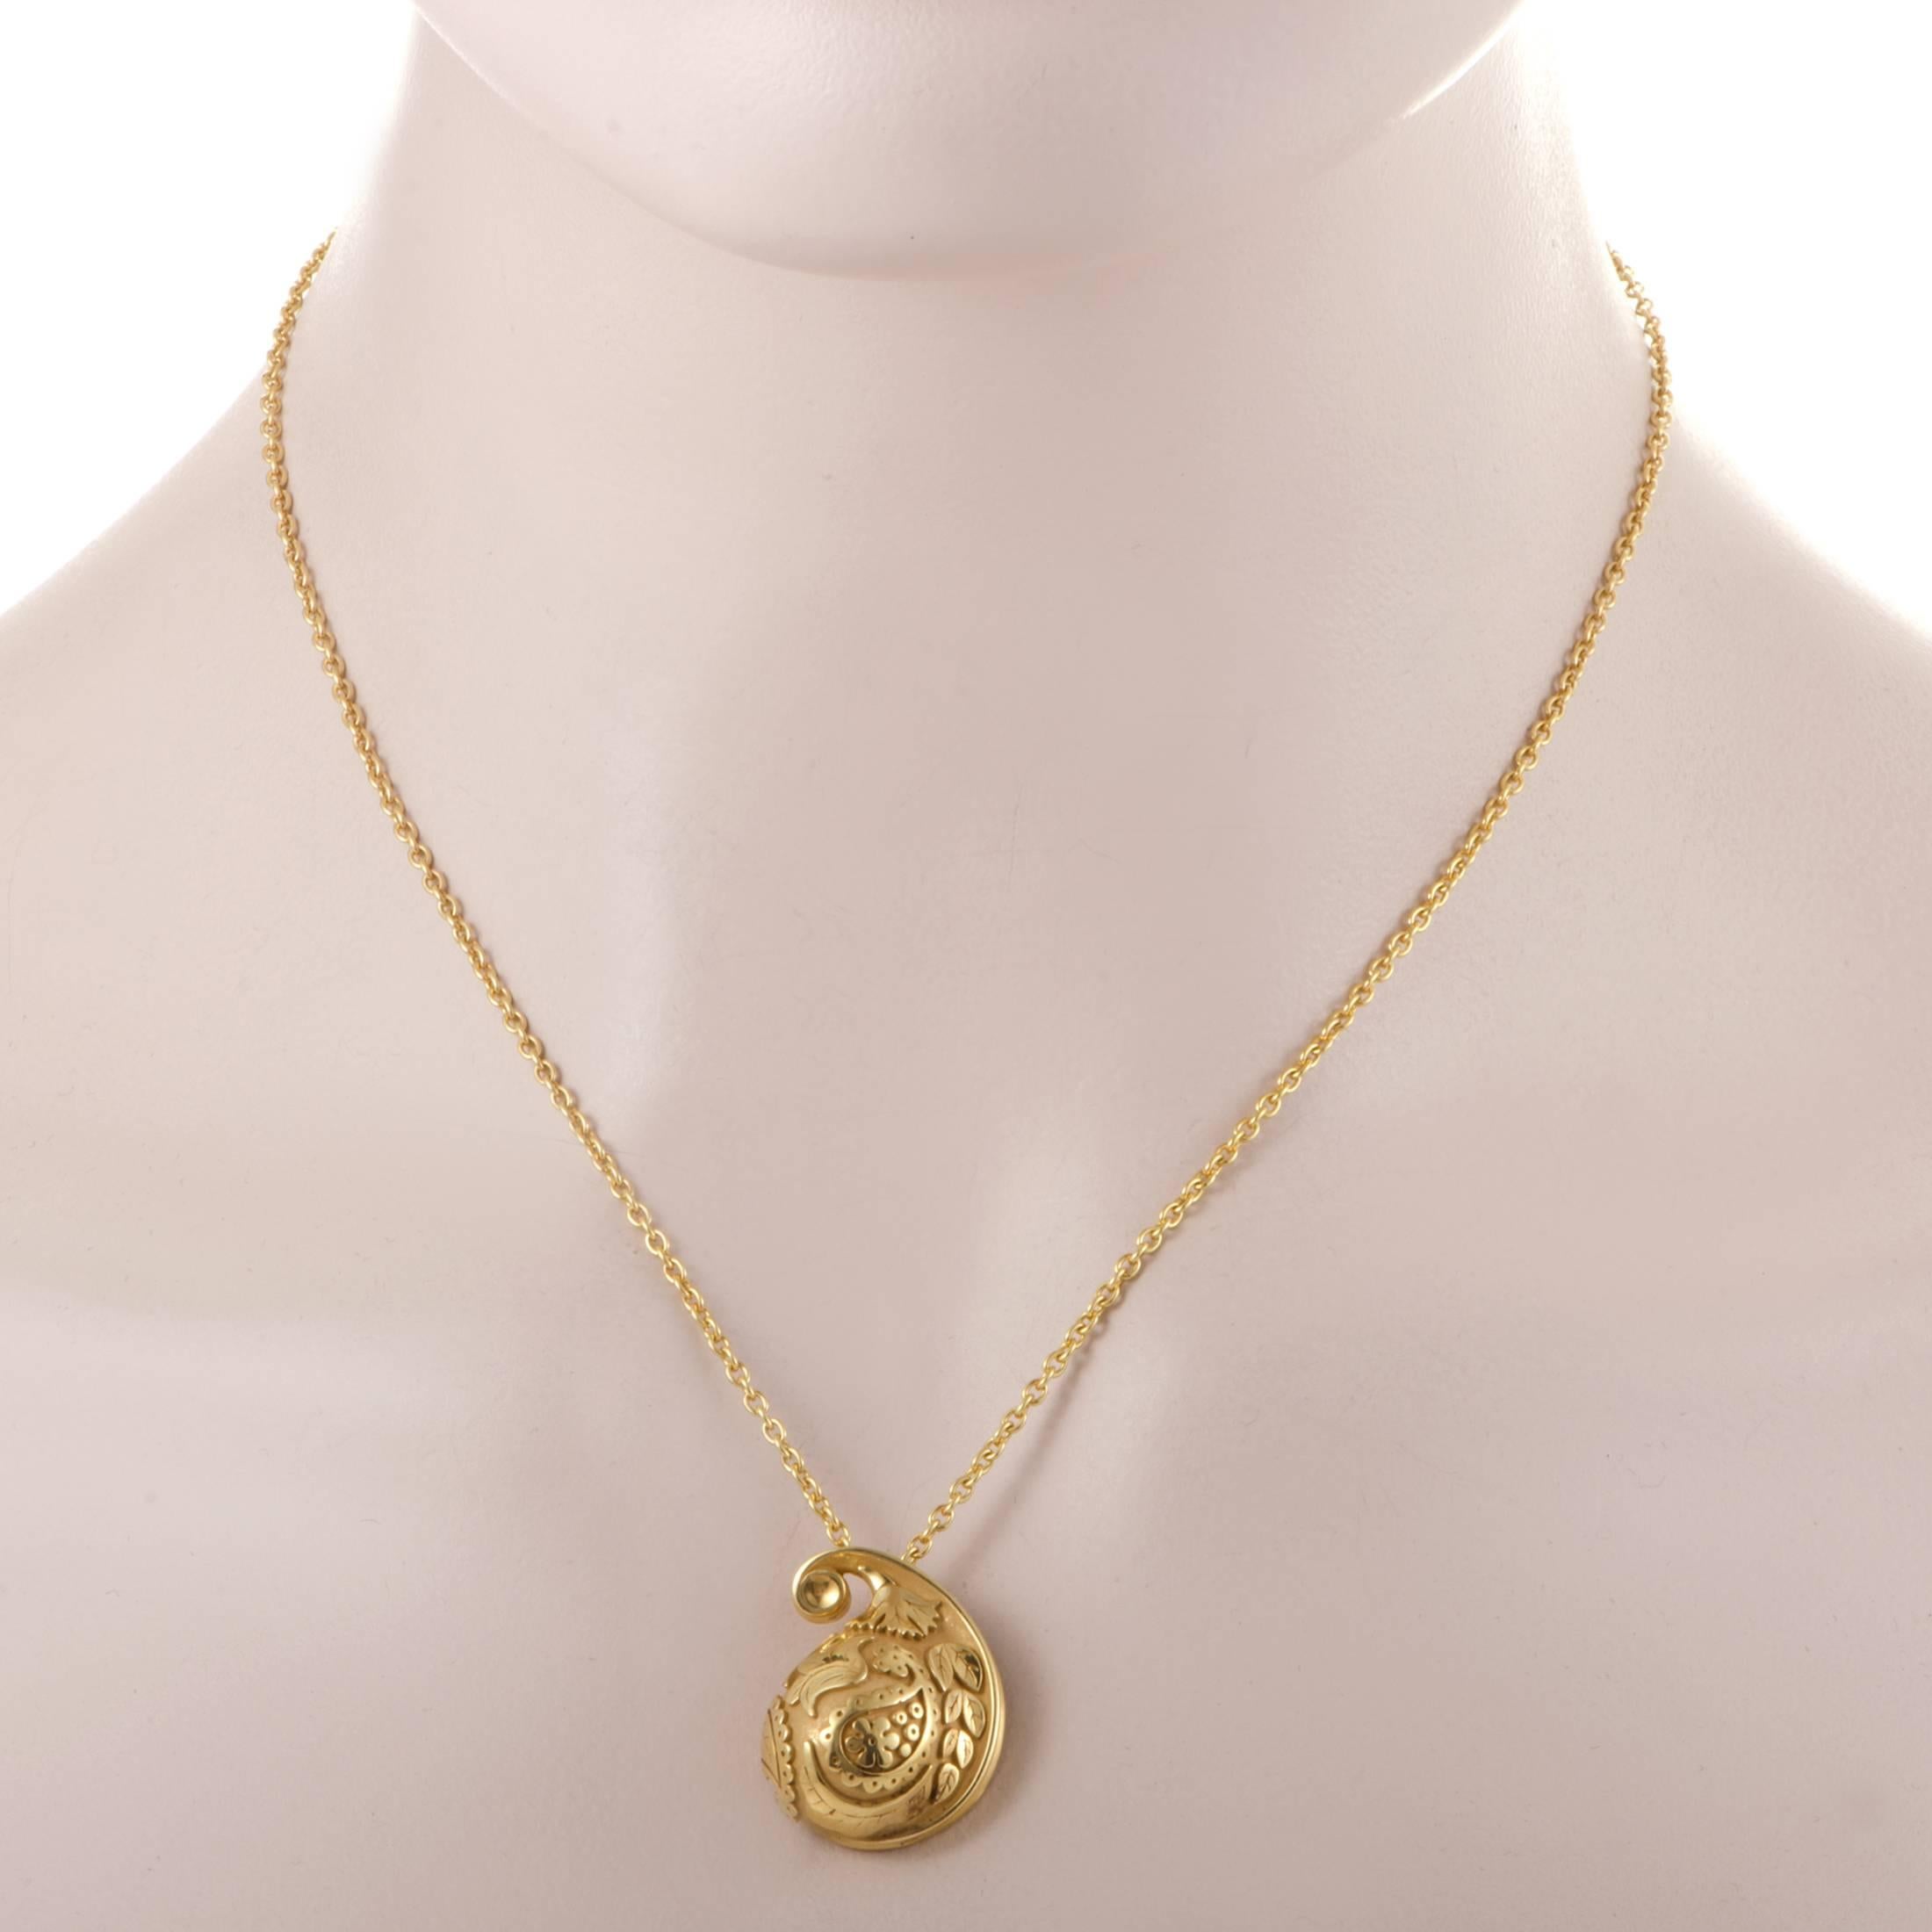 Bringing out the inherent luxurious allure of 18K yellow gold through a design that boasts wonderful artistic ornamentation, Carrera y Carrera present this fabulous necklace with a pendant which is adorned with adorable motifs in expertly crafted